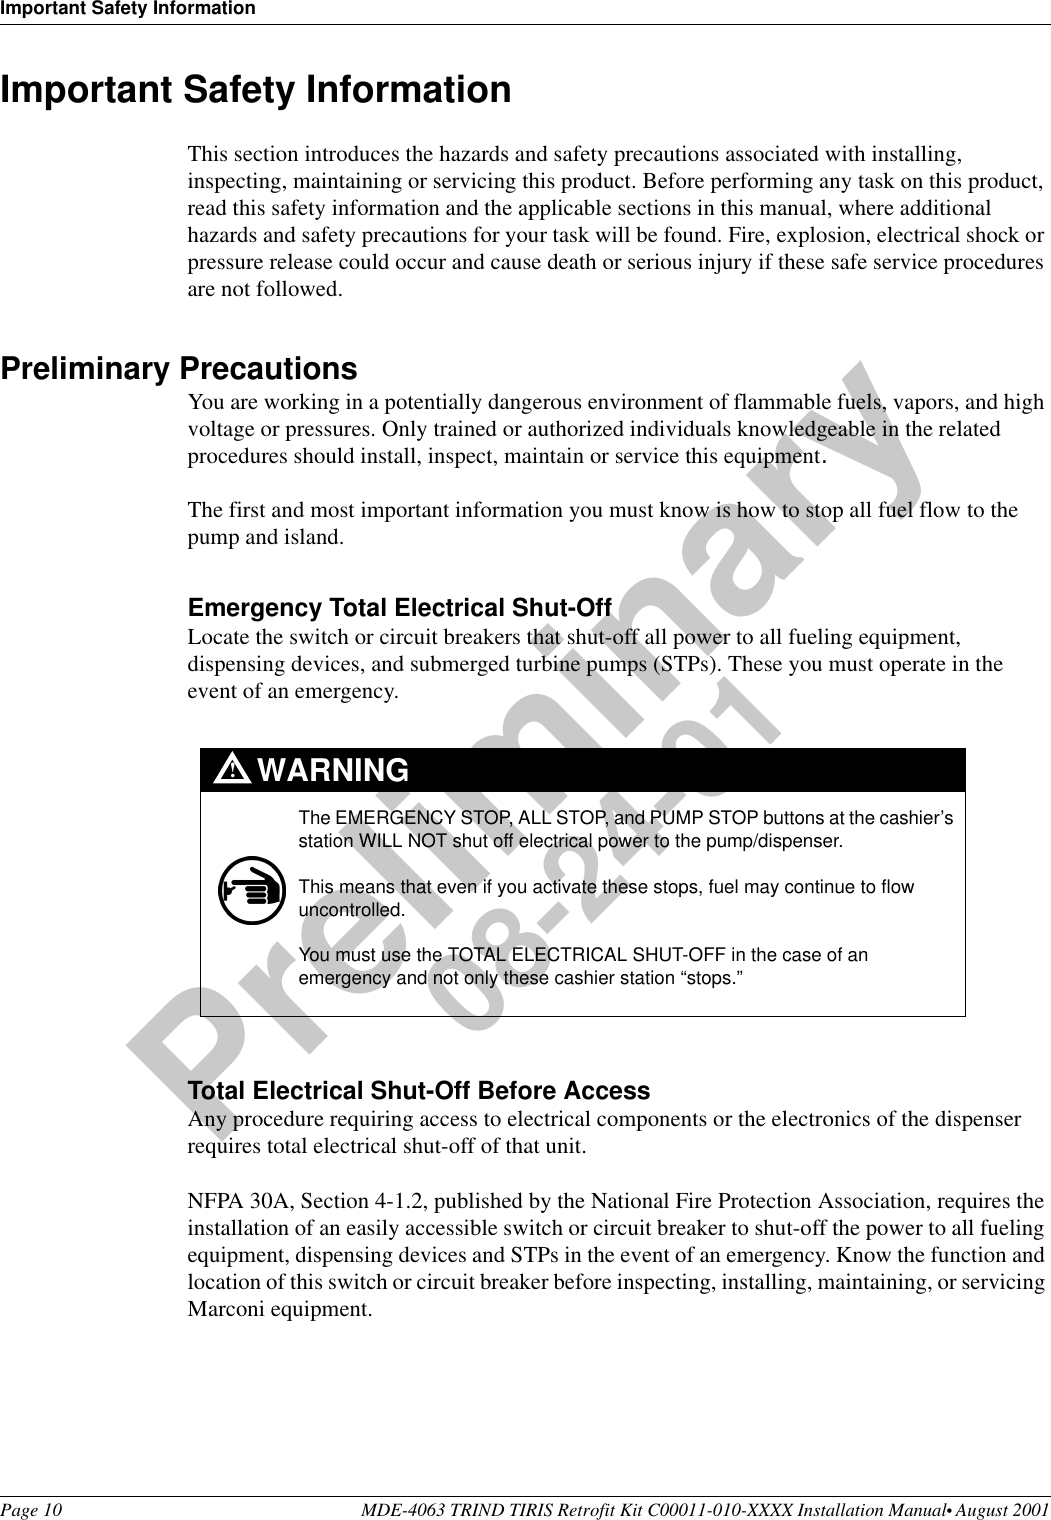 Important Safety InformationPage 10 MDE-4063 TRIND TIRIS Retrofit Kit C00011-010-XXXX Installation Manual• August 2001Preliminary08-24-01Important Safety InformationThis section introduces the hazards and safety precautions associated with installing, inspecting, maintaining or servicing this product. Before performing any task on this product, read this safety information and the applicable sections in this manual, where additional hazards and safety precautions for your task will be found. Fire, explosion, electrical shock or pressure release could occur and cause death or serious injury if these safe service procedures are not followed. Preliminary PrecautionsYou are working in a potentially dangerous environment of flammable fuels, vapors, and high voltage or pressures. Only trained or authorized individuals knowledgeable in the related procedures should install, inspect, maintain or service this equipment.The first and most important information you must know is how to stop all fuel flow to the pump and island.Emergency Total Electrical Shut-OffLocate the switch or circuit breakers that shut-off all power to all fueling equipment, dispensing devices, and submerged turbine pumps (STPs). These you must operate in the event of an emergency.Total Electrical Shut-Off Before AccessAny procedure requiring access to electrical components or the electronics of the dispenser requires total electrical shut-off of that unit. NFPA 30A, Section 4-1.2, published by the National Fire Protection Association, requires the installation of an easily accessible switch or circuit breaker to shut-off the power to all fueling equipment, dispensing devices and STPs in the event of an emergency. Know the function and location of this switch or circuit breaker before inspecting, installing, maintaining, or servicing Marconi equipment.The EMERGENCY STOP, ALL STOP, and PUMP STOP buttons at the cashier’s station WILL NOT shut off electrical power to the pump/dispenser. This means that even if you activate these stops, fuel may continue to flow uncontrolled. You must use the TOTAL ELECTRICAL SHUT-OFF in the case of an emergency and not only these cashier station “stops.”WARNING!